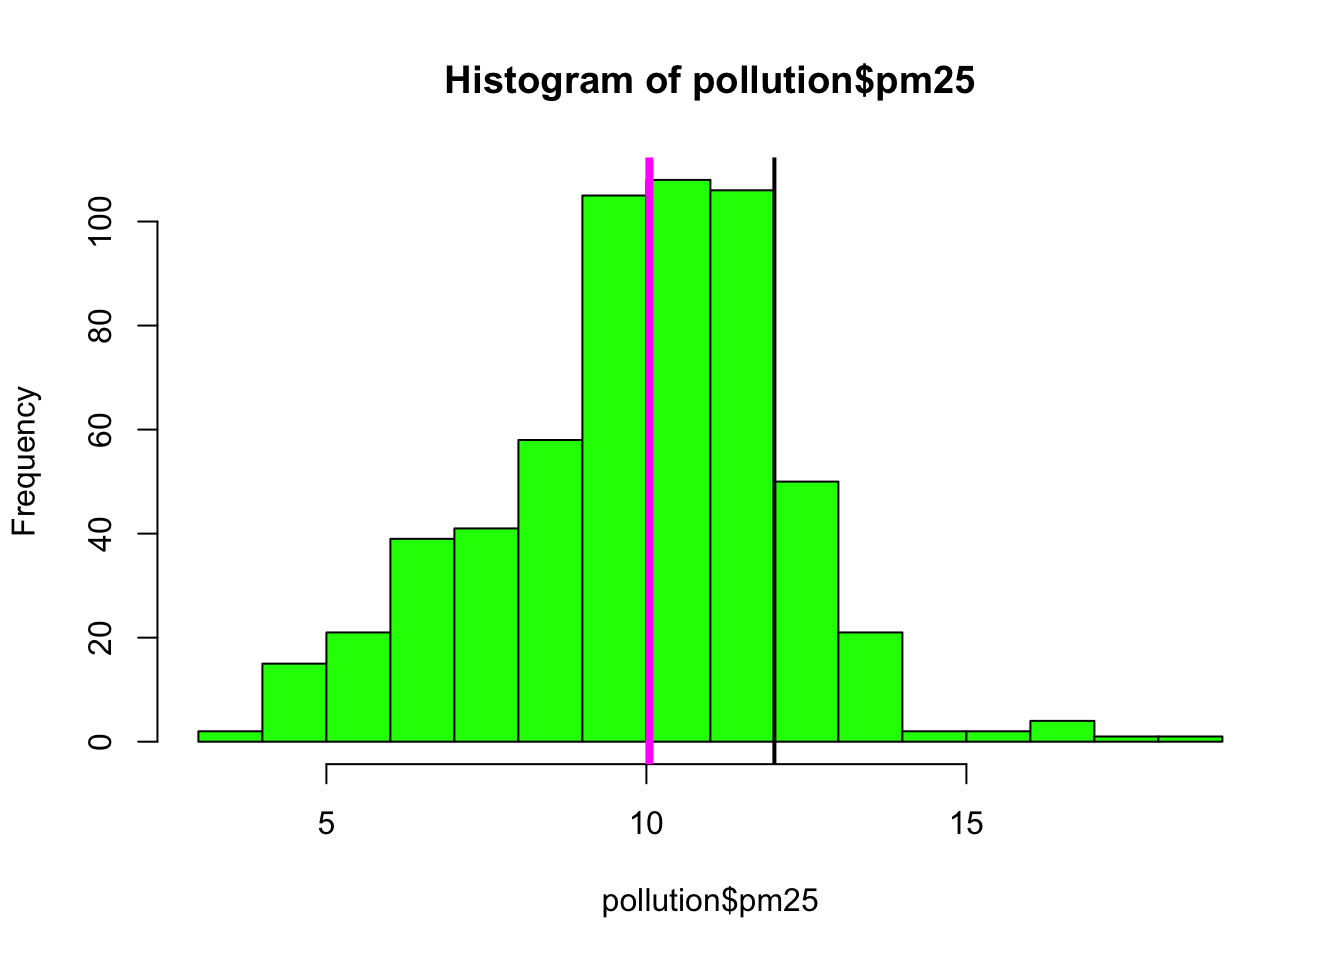 Histogram of PM2.5 data with annotation